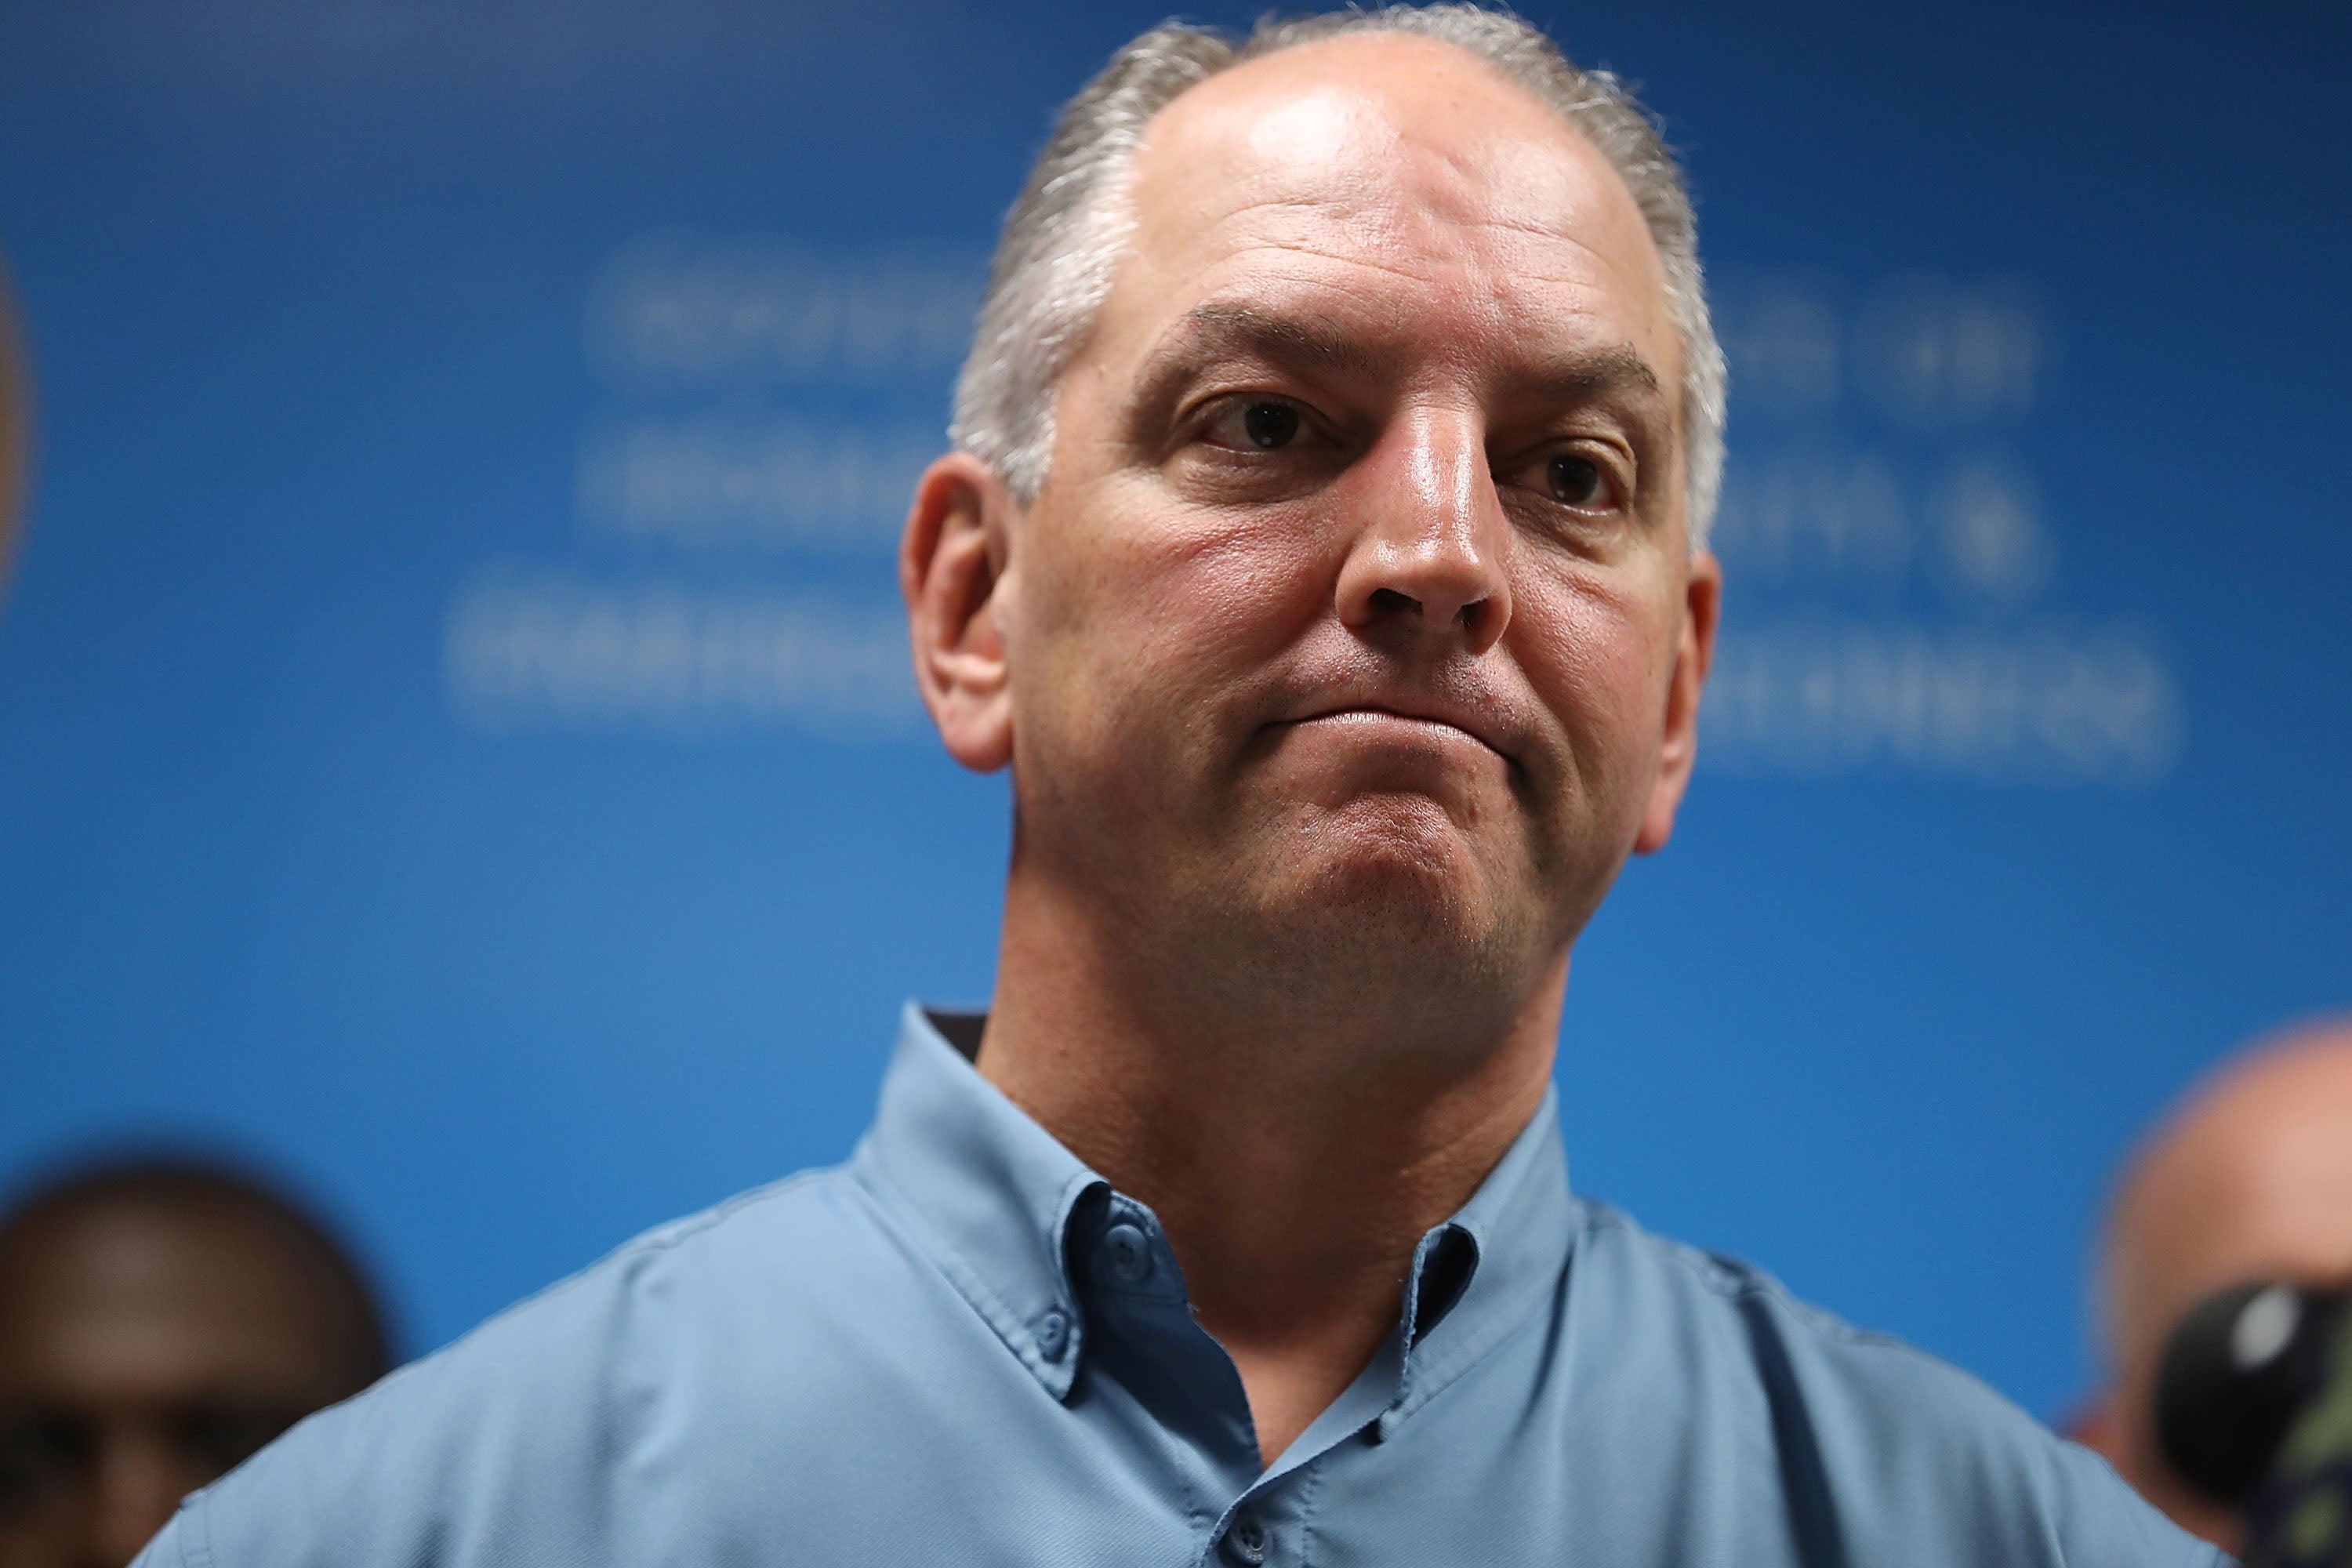 Louisiana Governor John Bel Edwards speaks during a press conference to update the public on FEMA’s disaster recover and temporary housing programs on August 19, 2016 in Baton Rouge, Louisiana. The governor has vetoed a bill seeking to bar transgender youth from participating on girls’ and women’s sports teams.